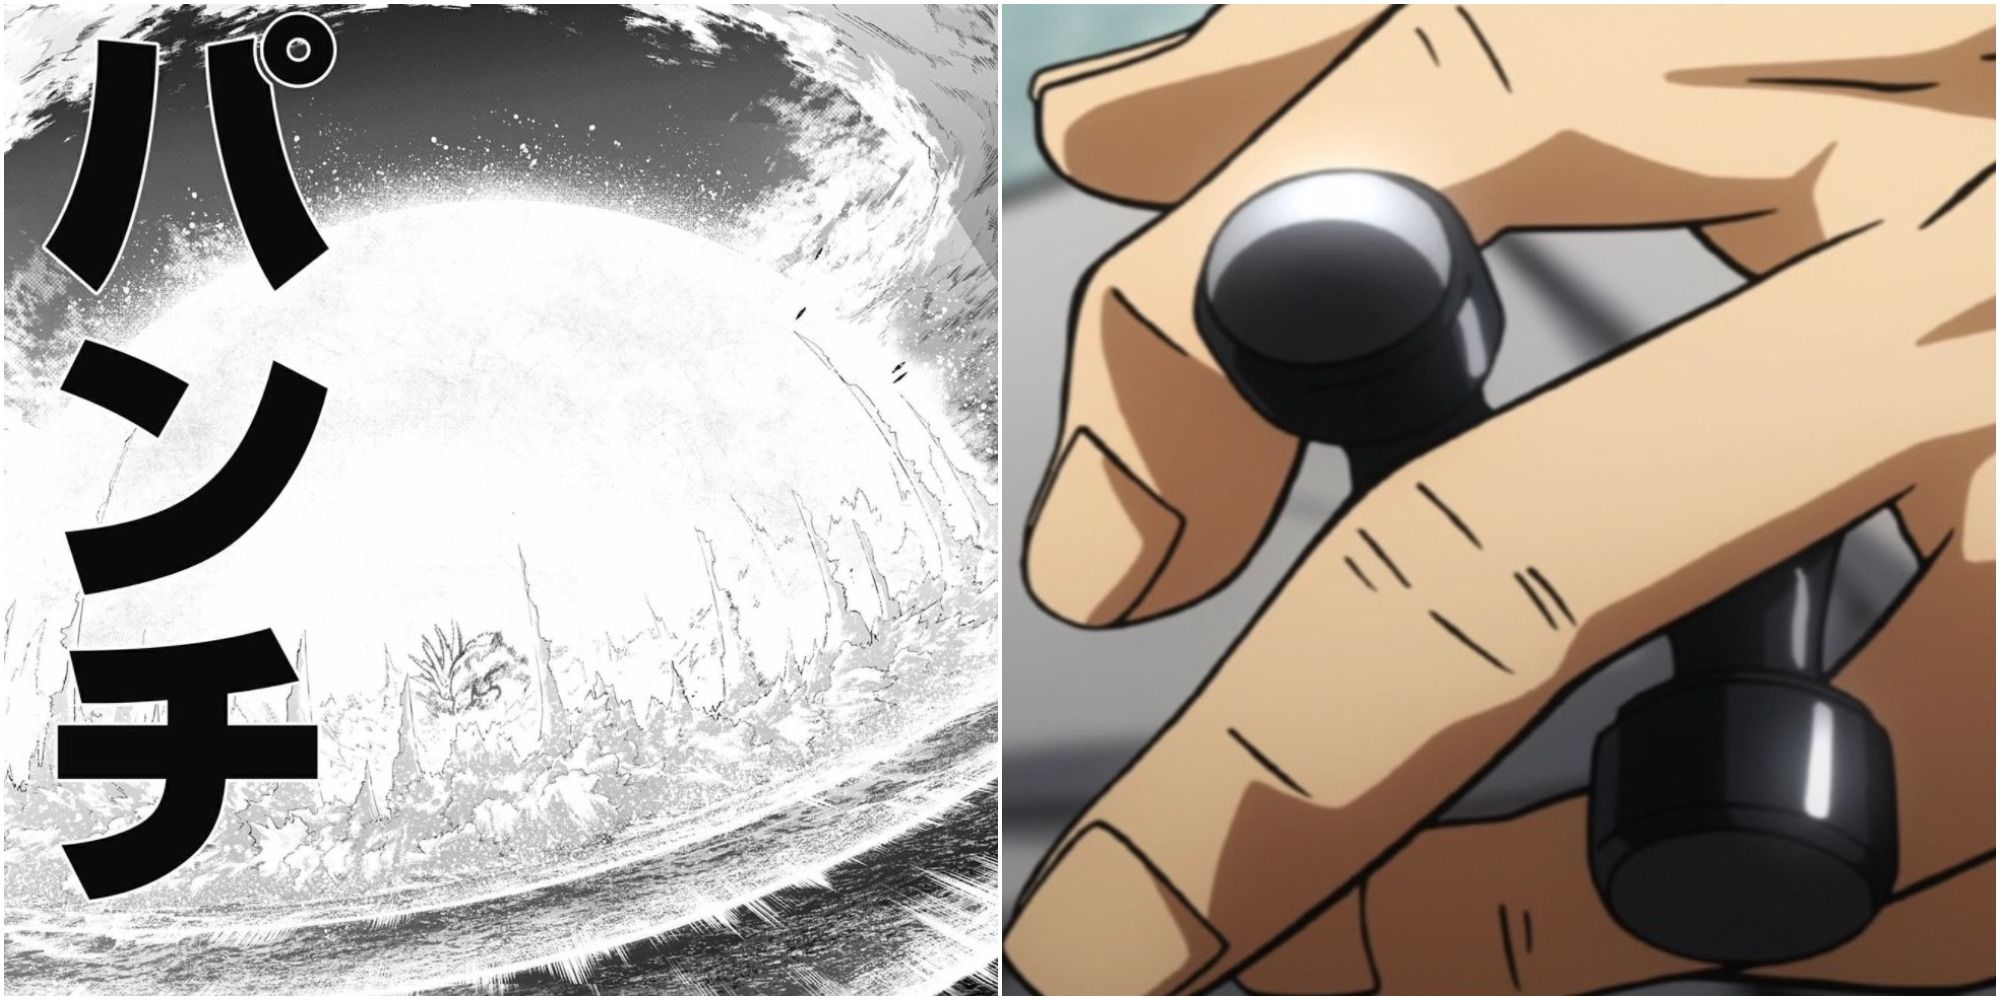 Nuclear Bomb and Heavy Weights in MHA